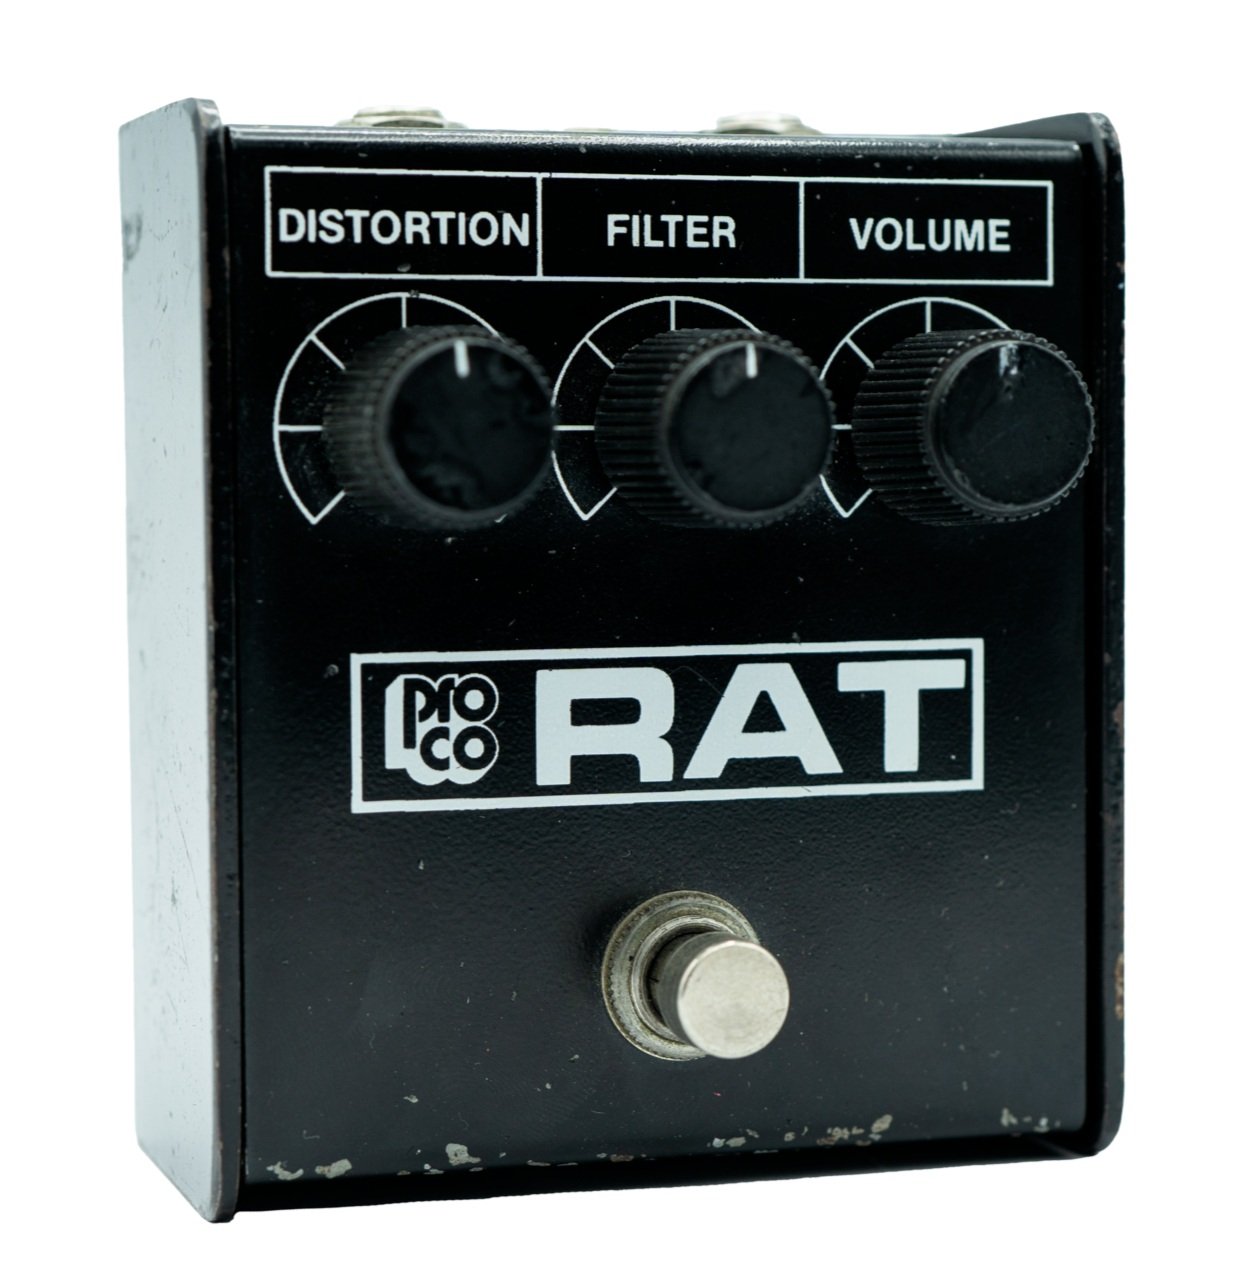 ProCo RAT pedal myths, history, and timeline — The JHS Show